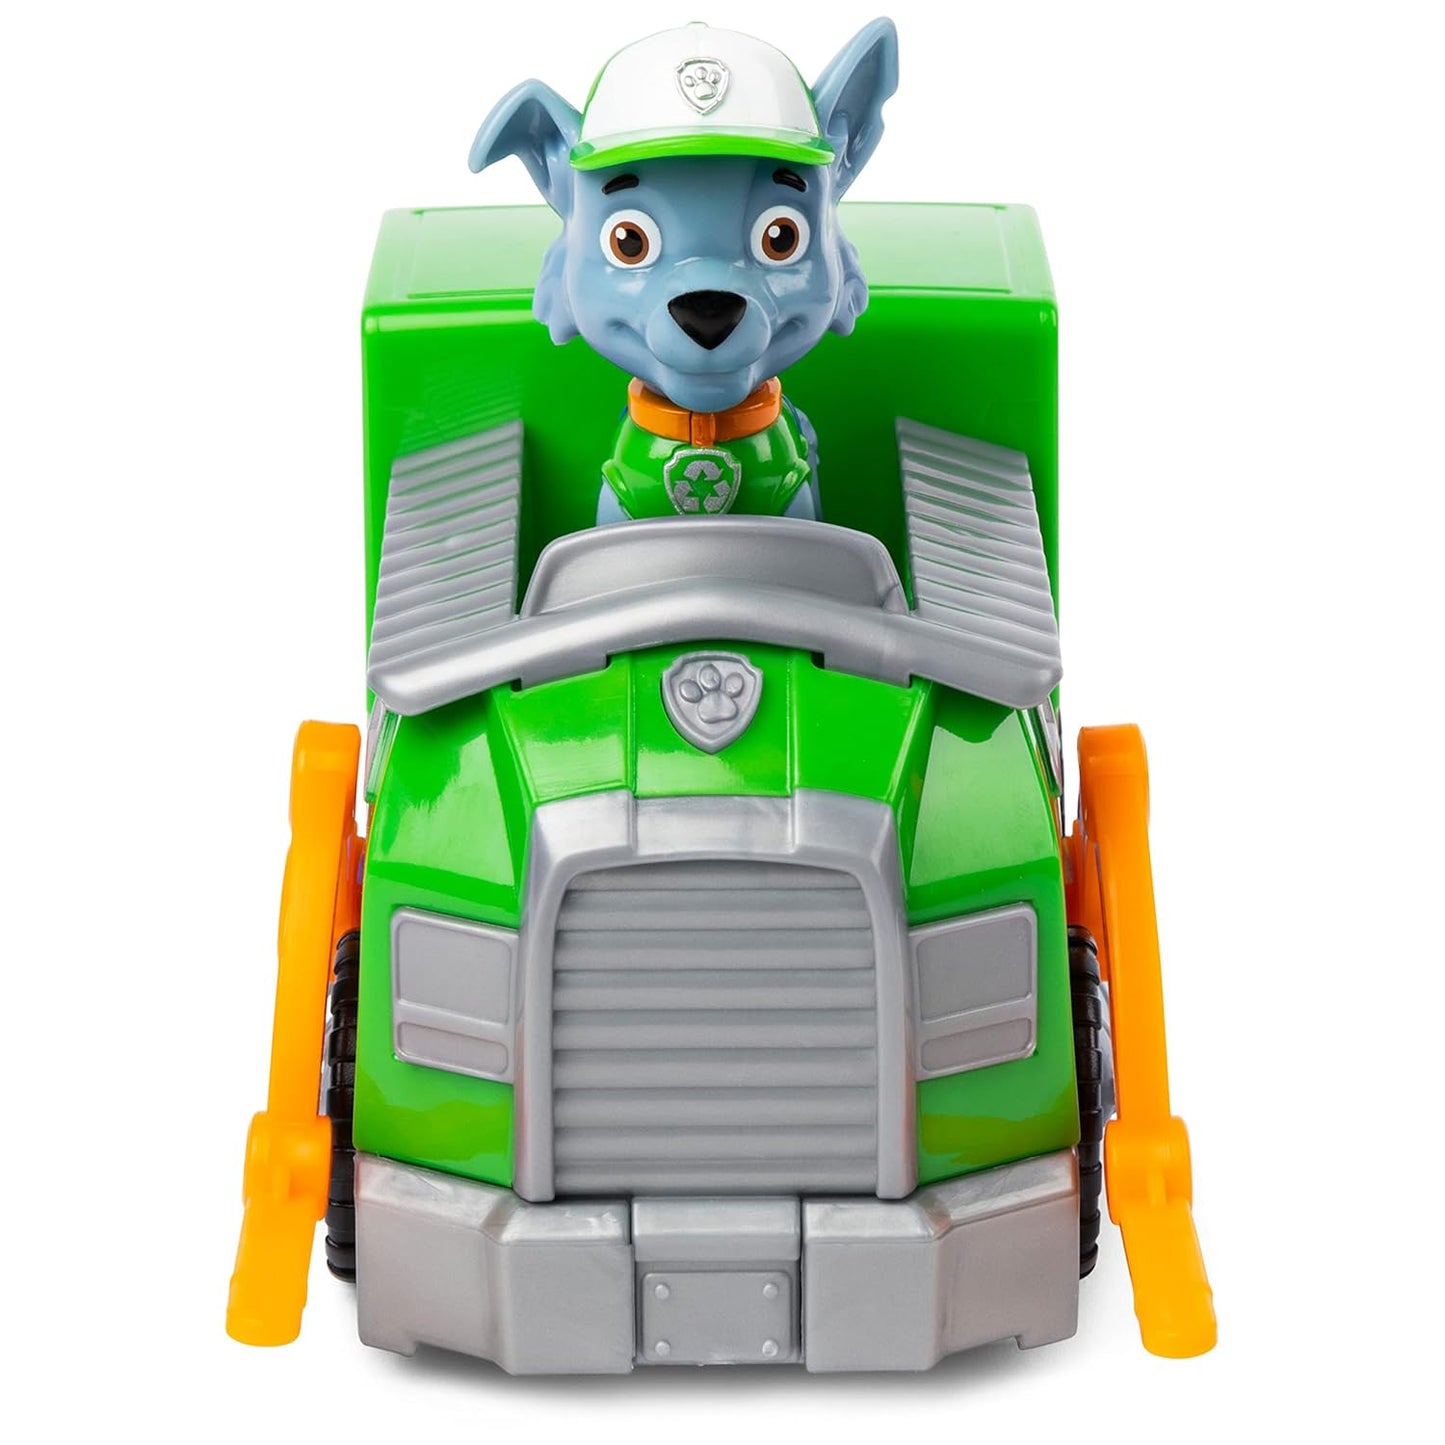 Paw Patrol  Rocky's Recycle Truck Vehicle with Collectible Figure